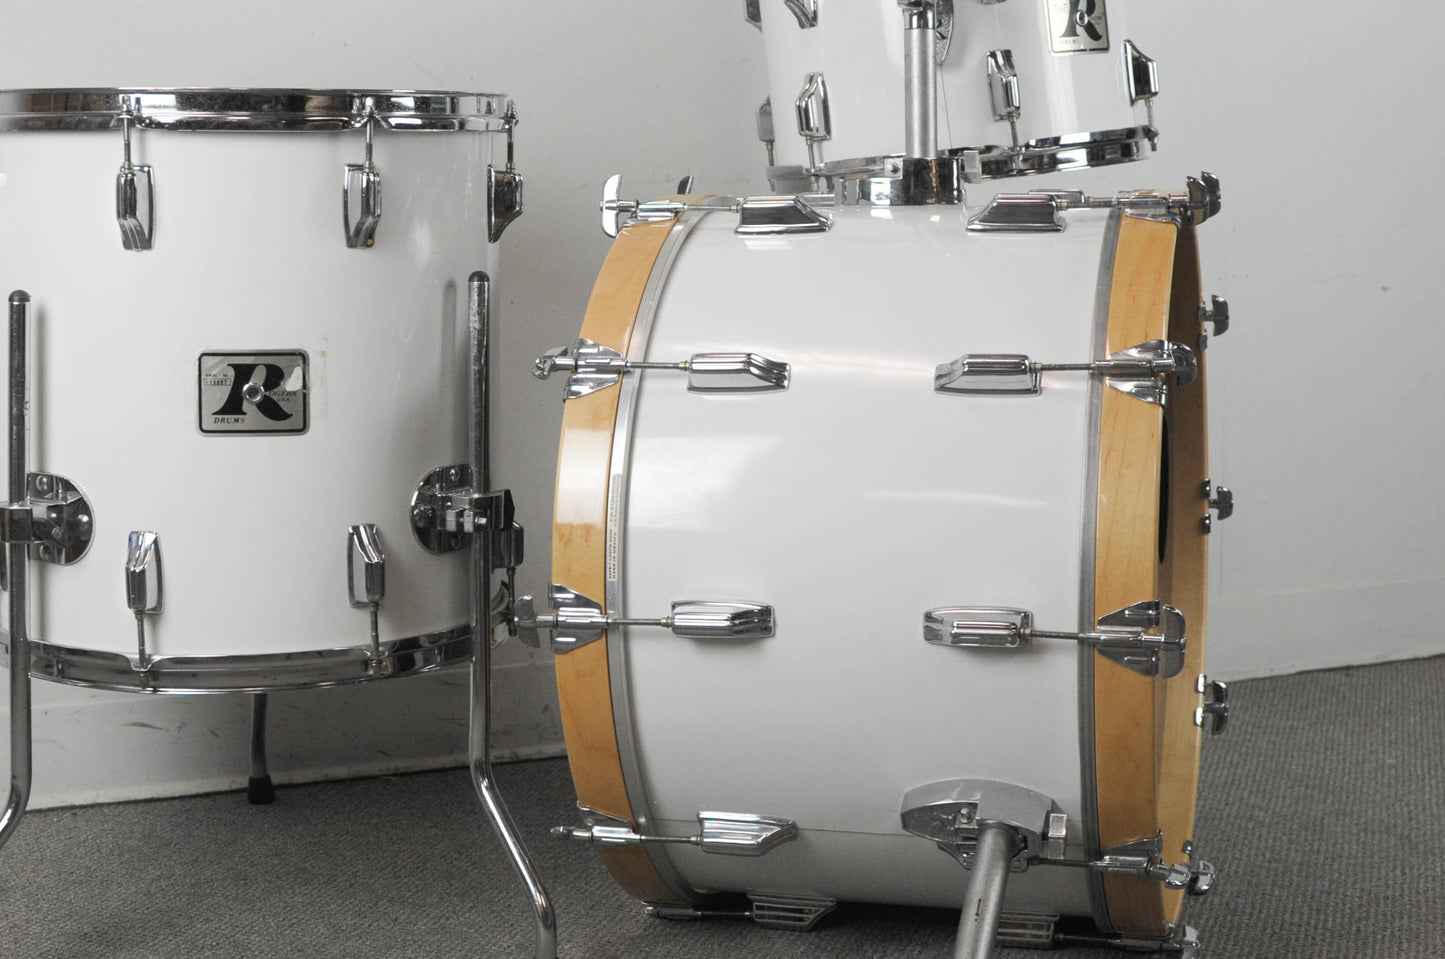 1970s Rogers Big R New England White Drum Set 14x22 9x13 and 16x16